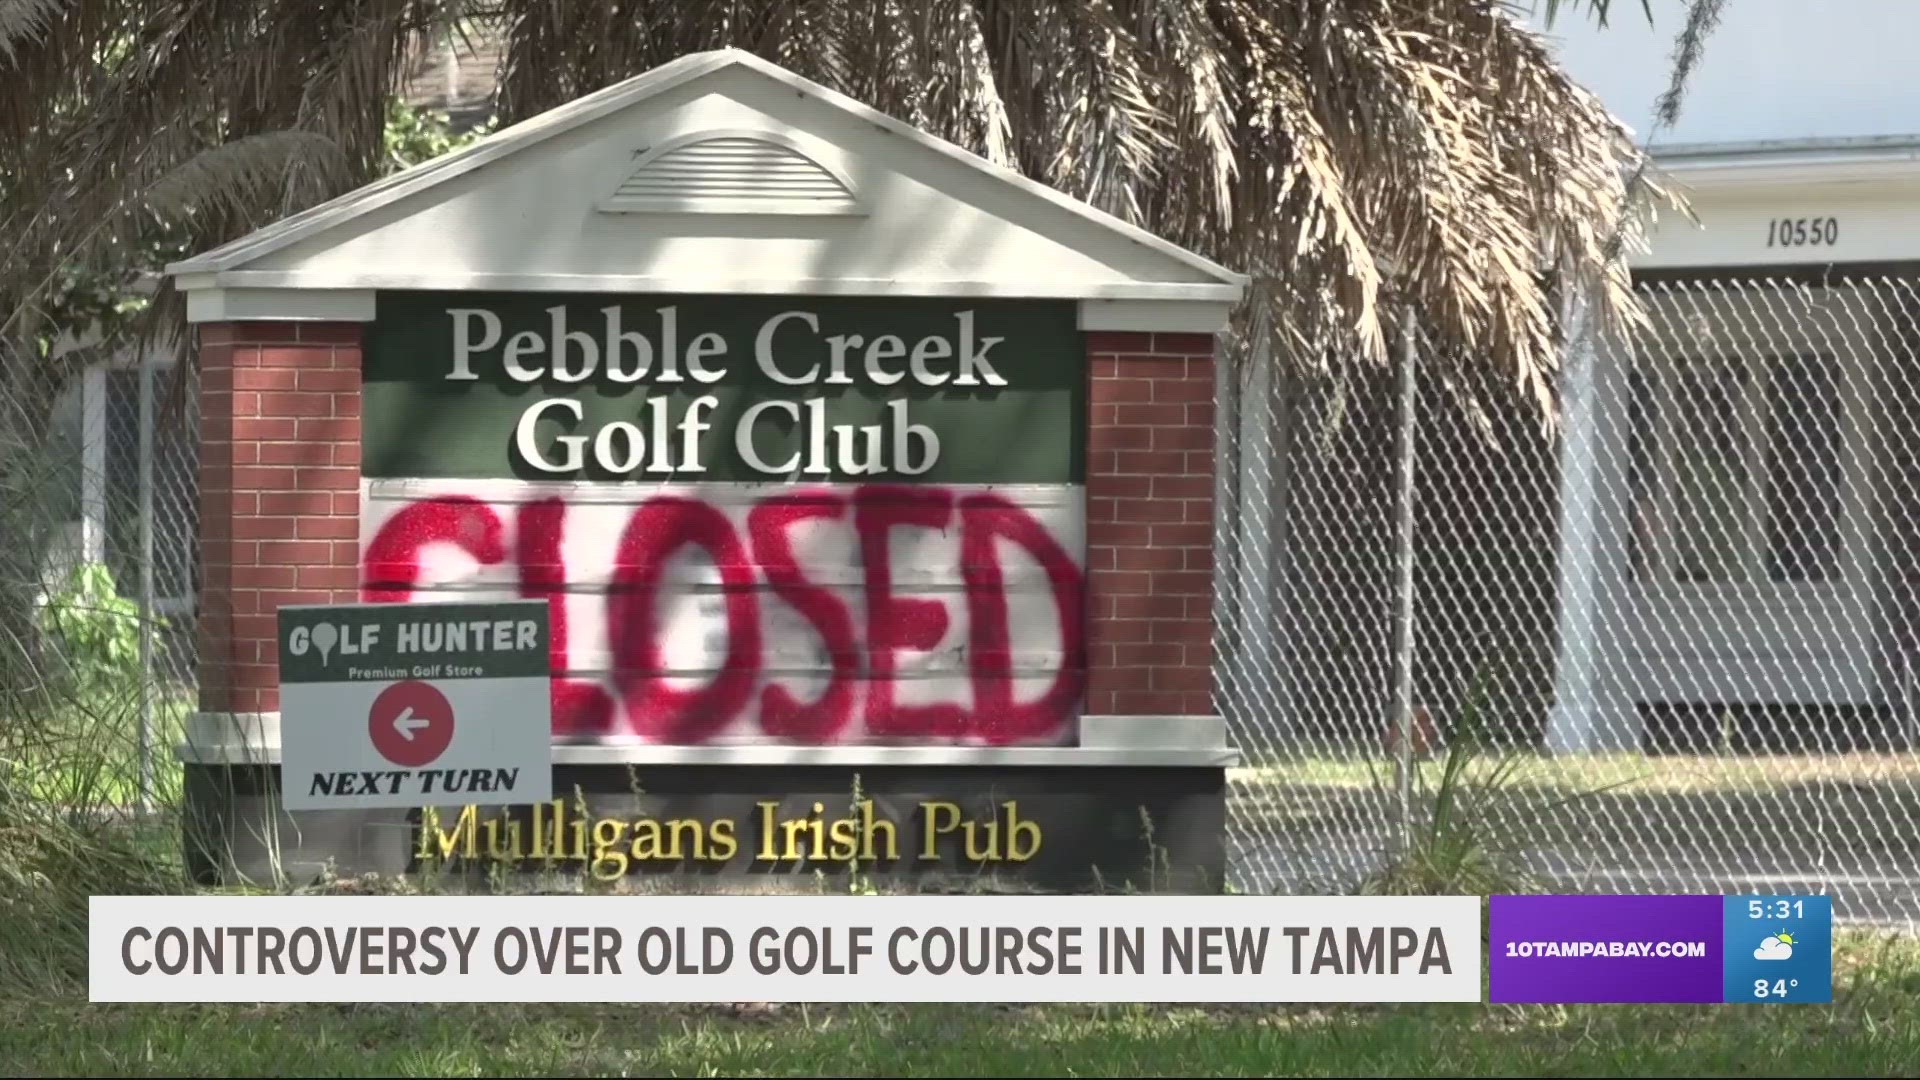 The controversy centers around a proposal to rezone what was the Pebble Creek Golf Club into more residential development.